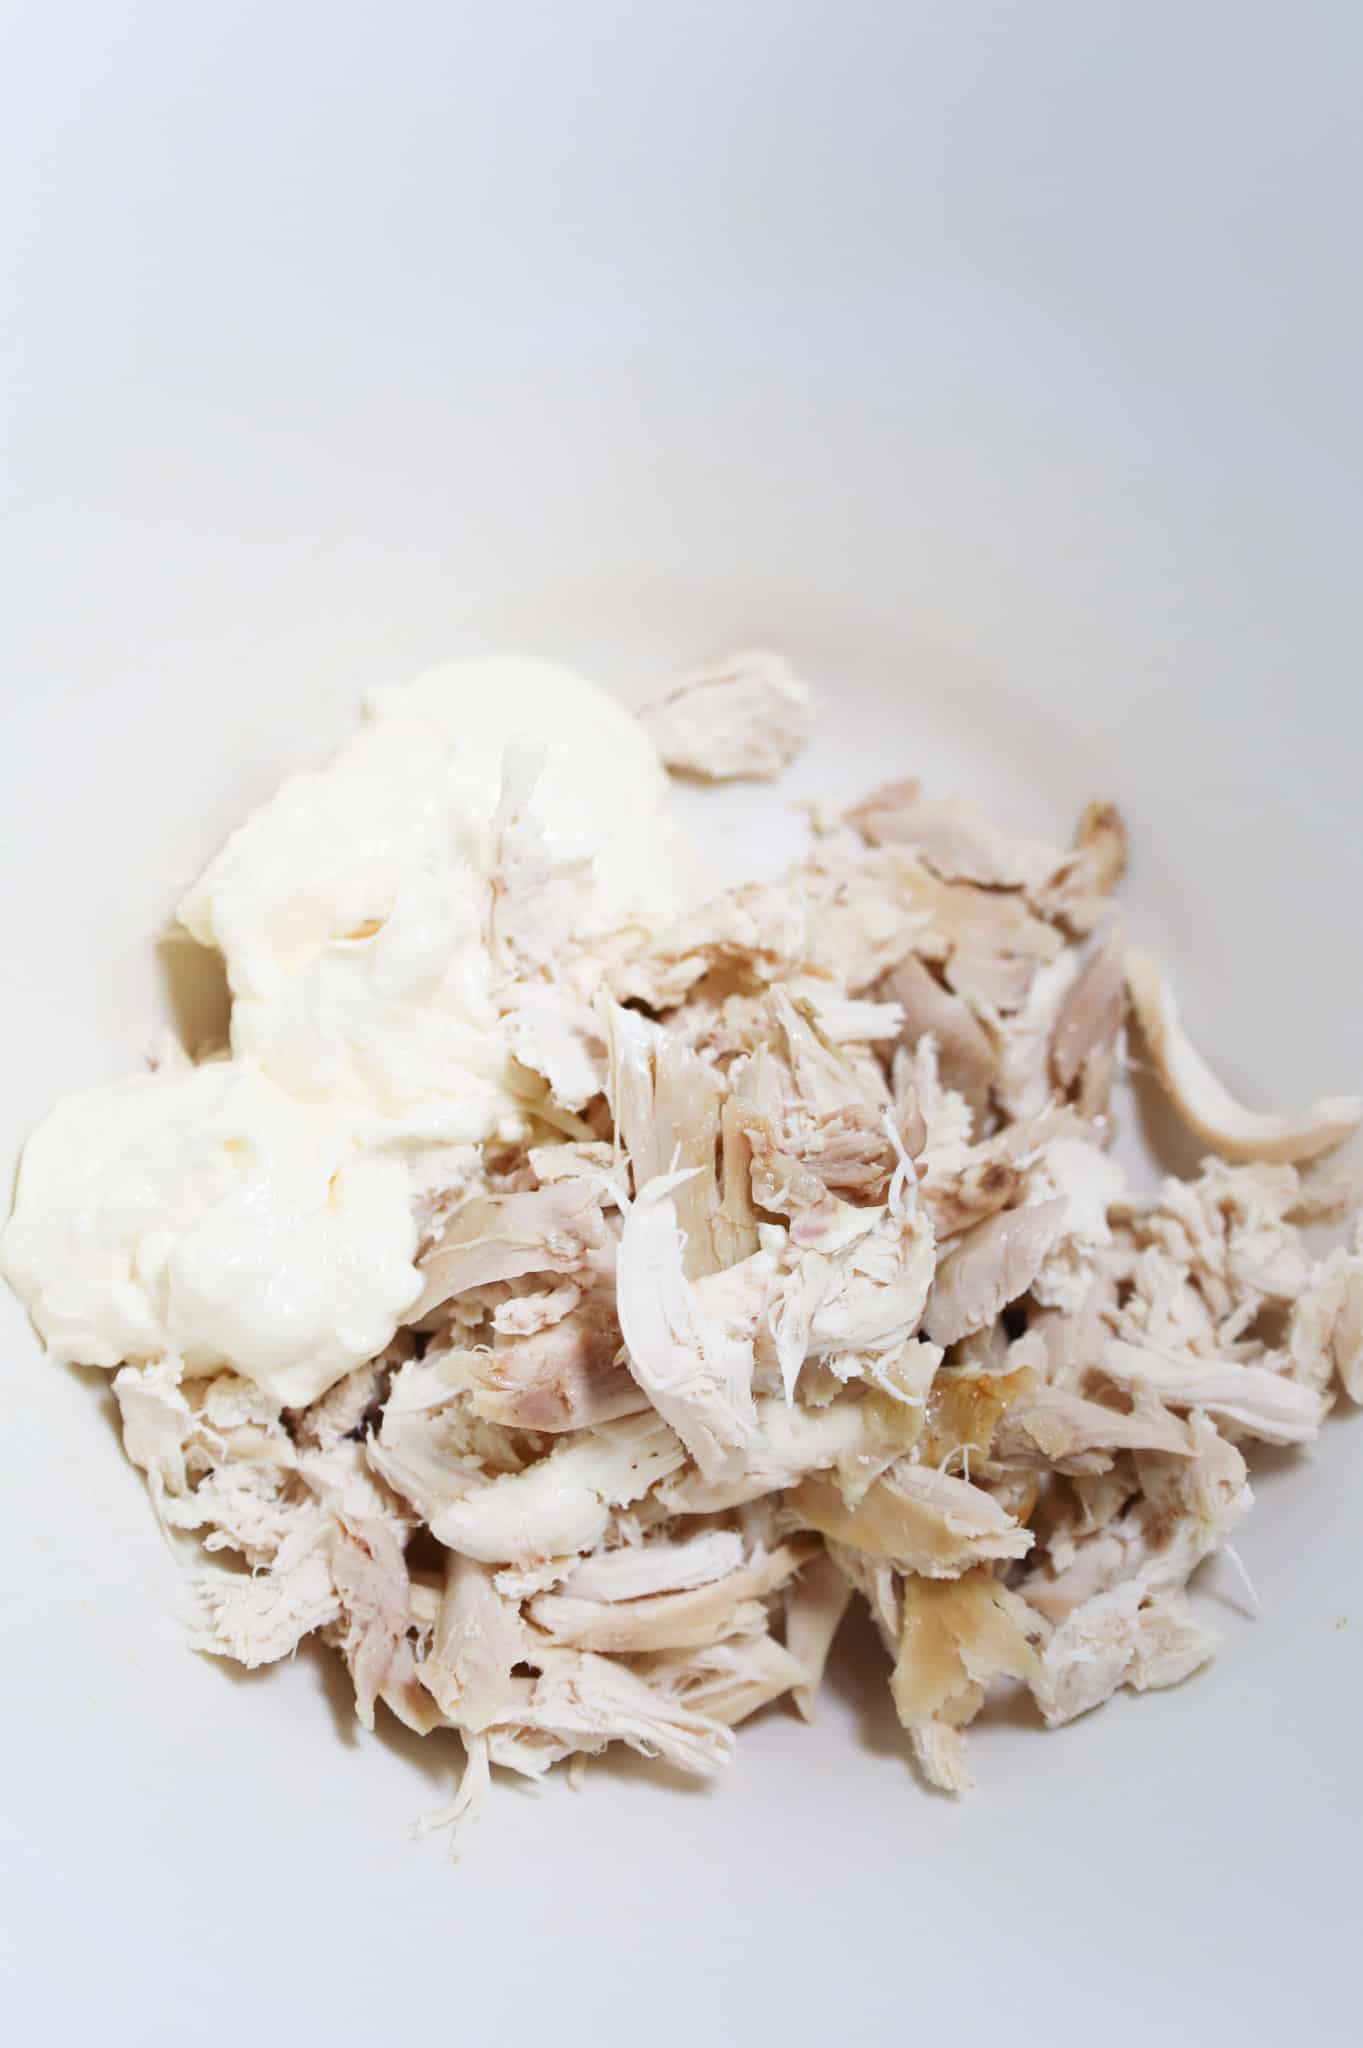 mayo and shredded rotisserie chicken in a mixing bowl